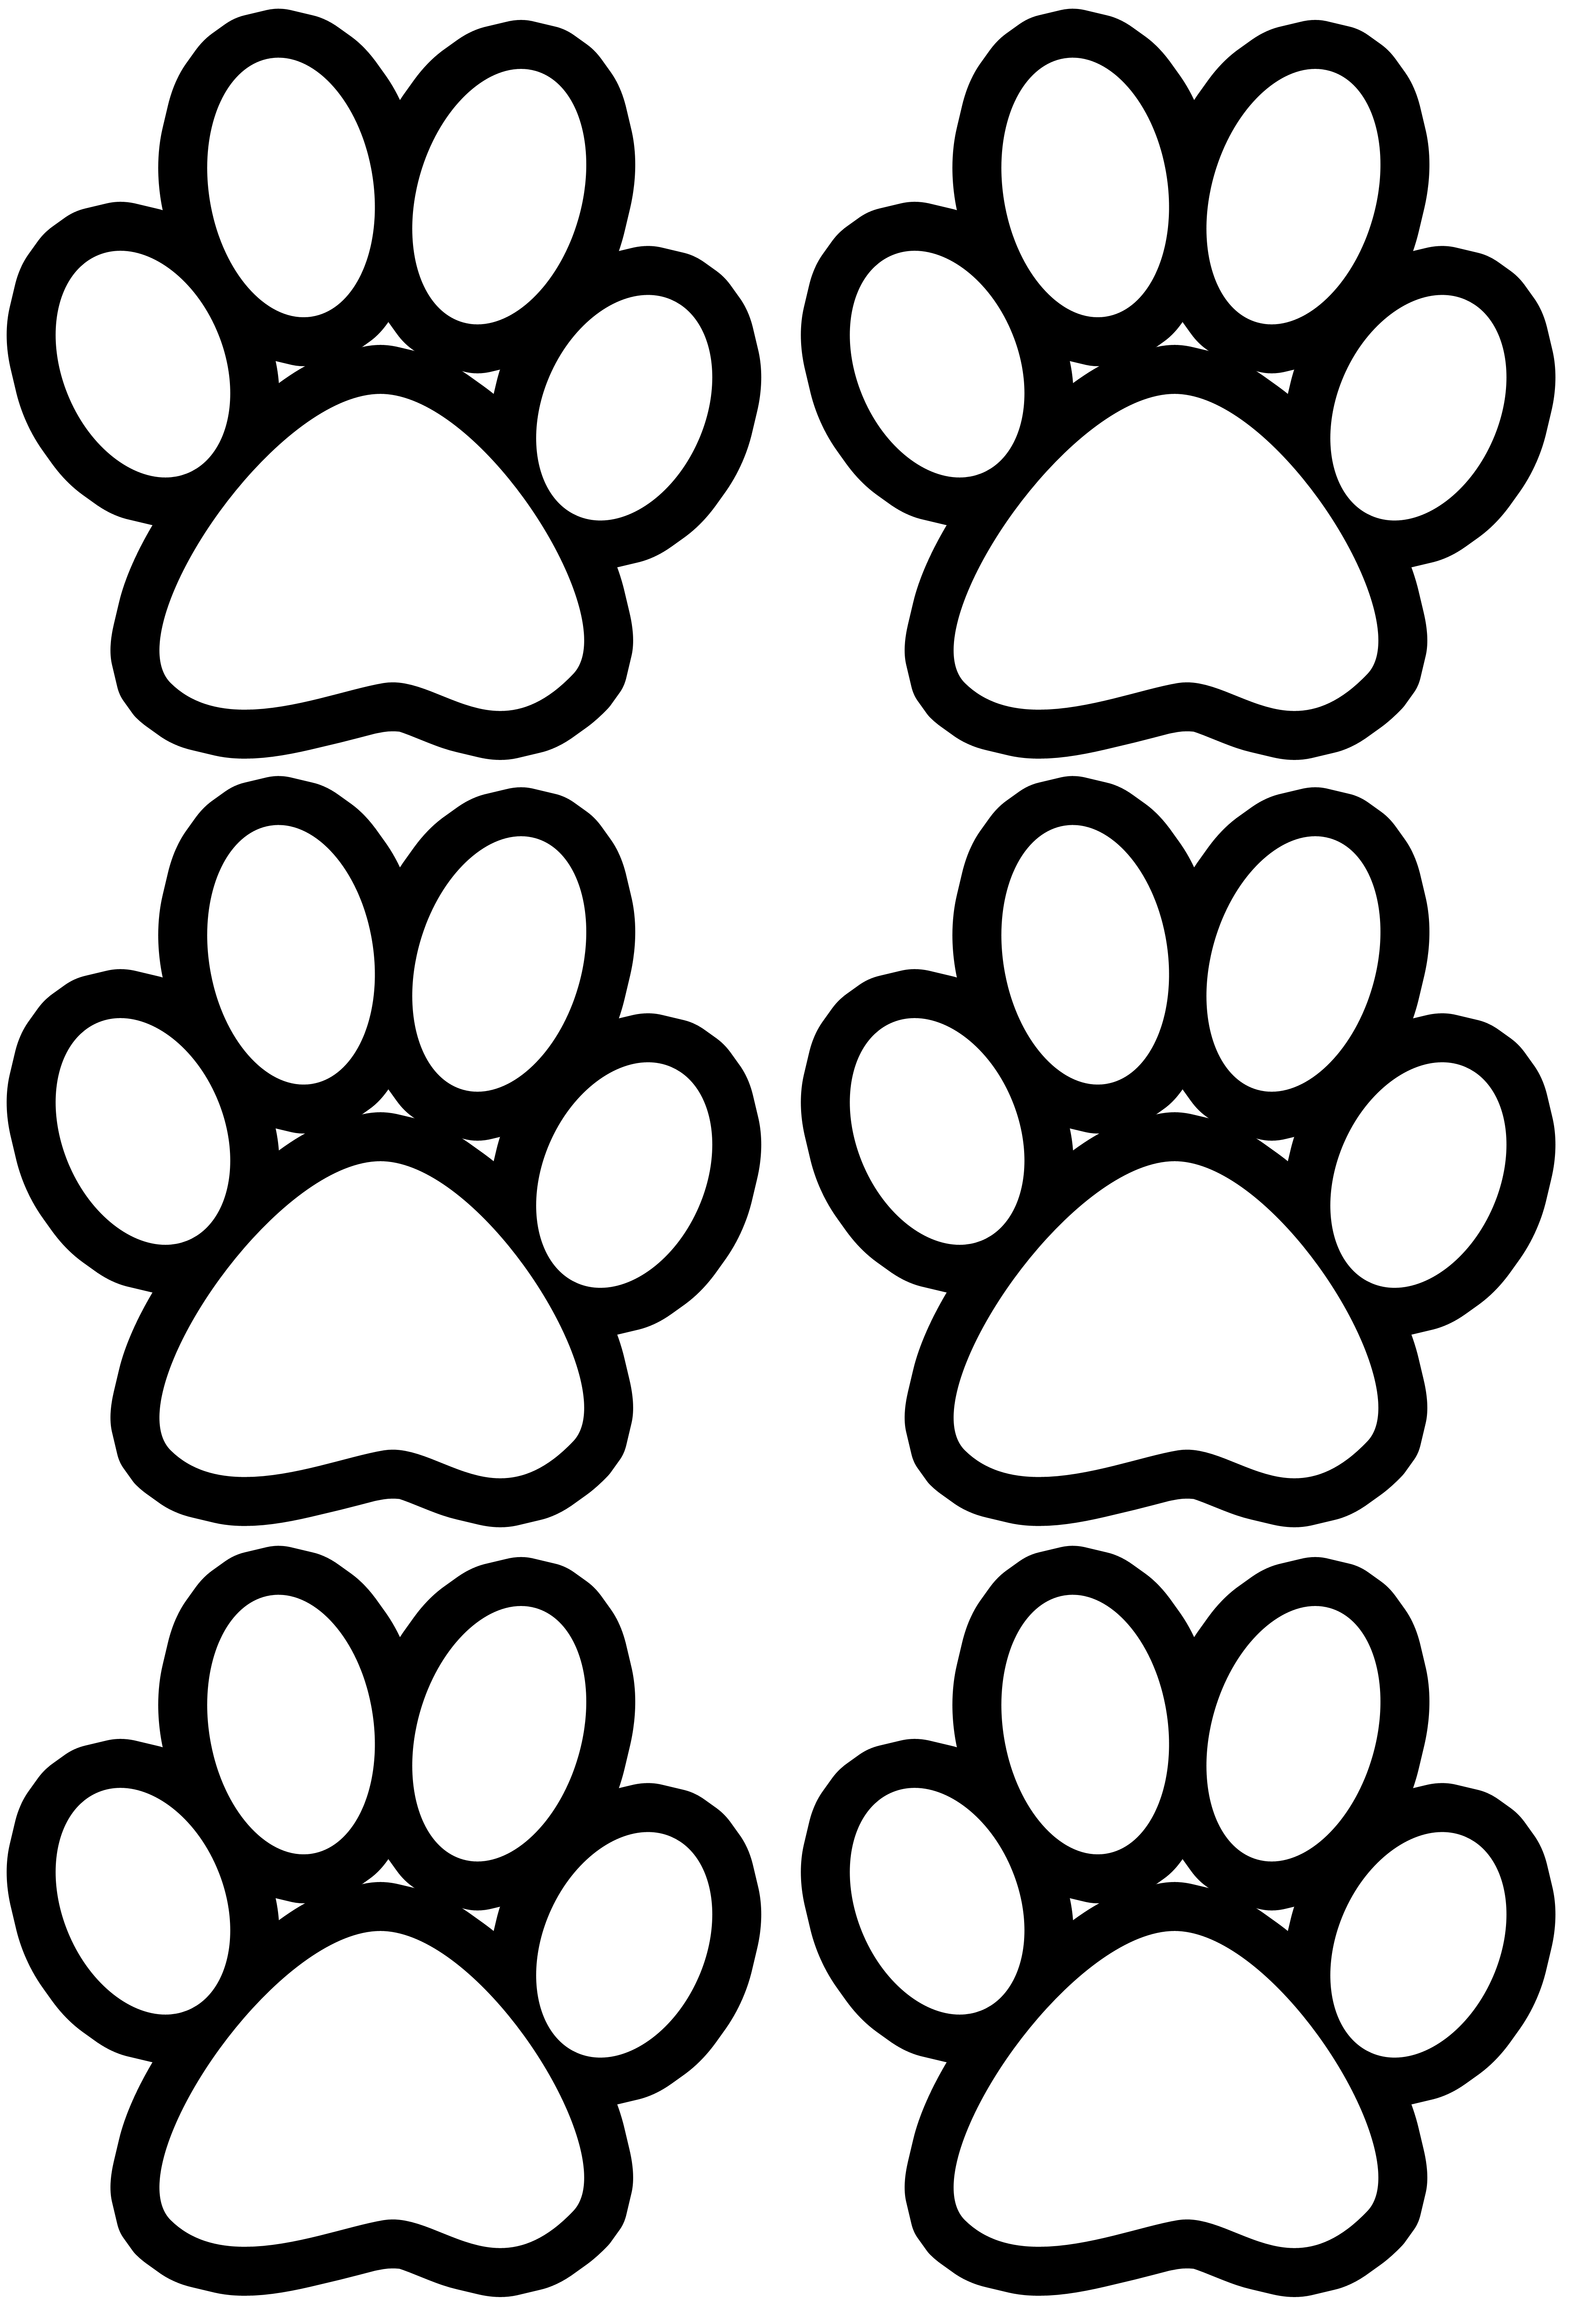 free-printable-paw-print-paper-discover-the-beauty-of-printable-paper